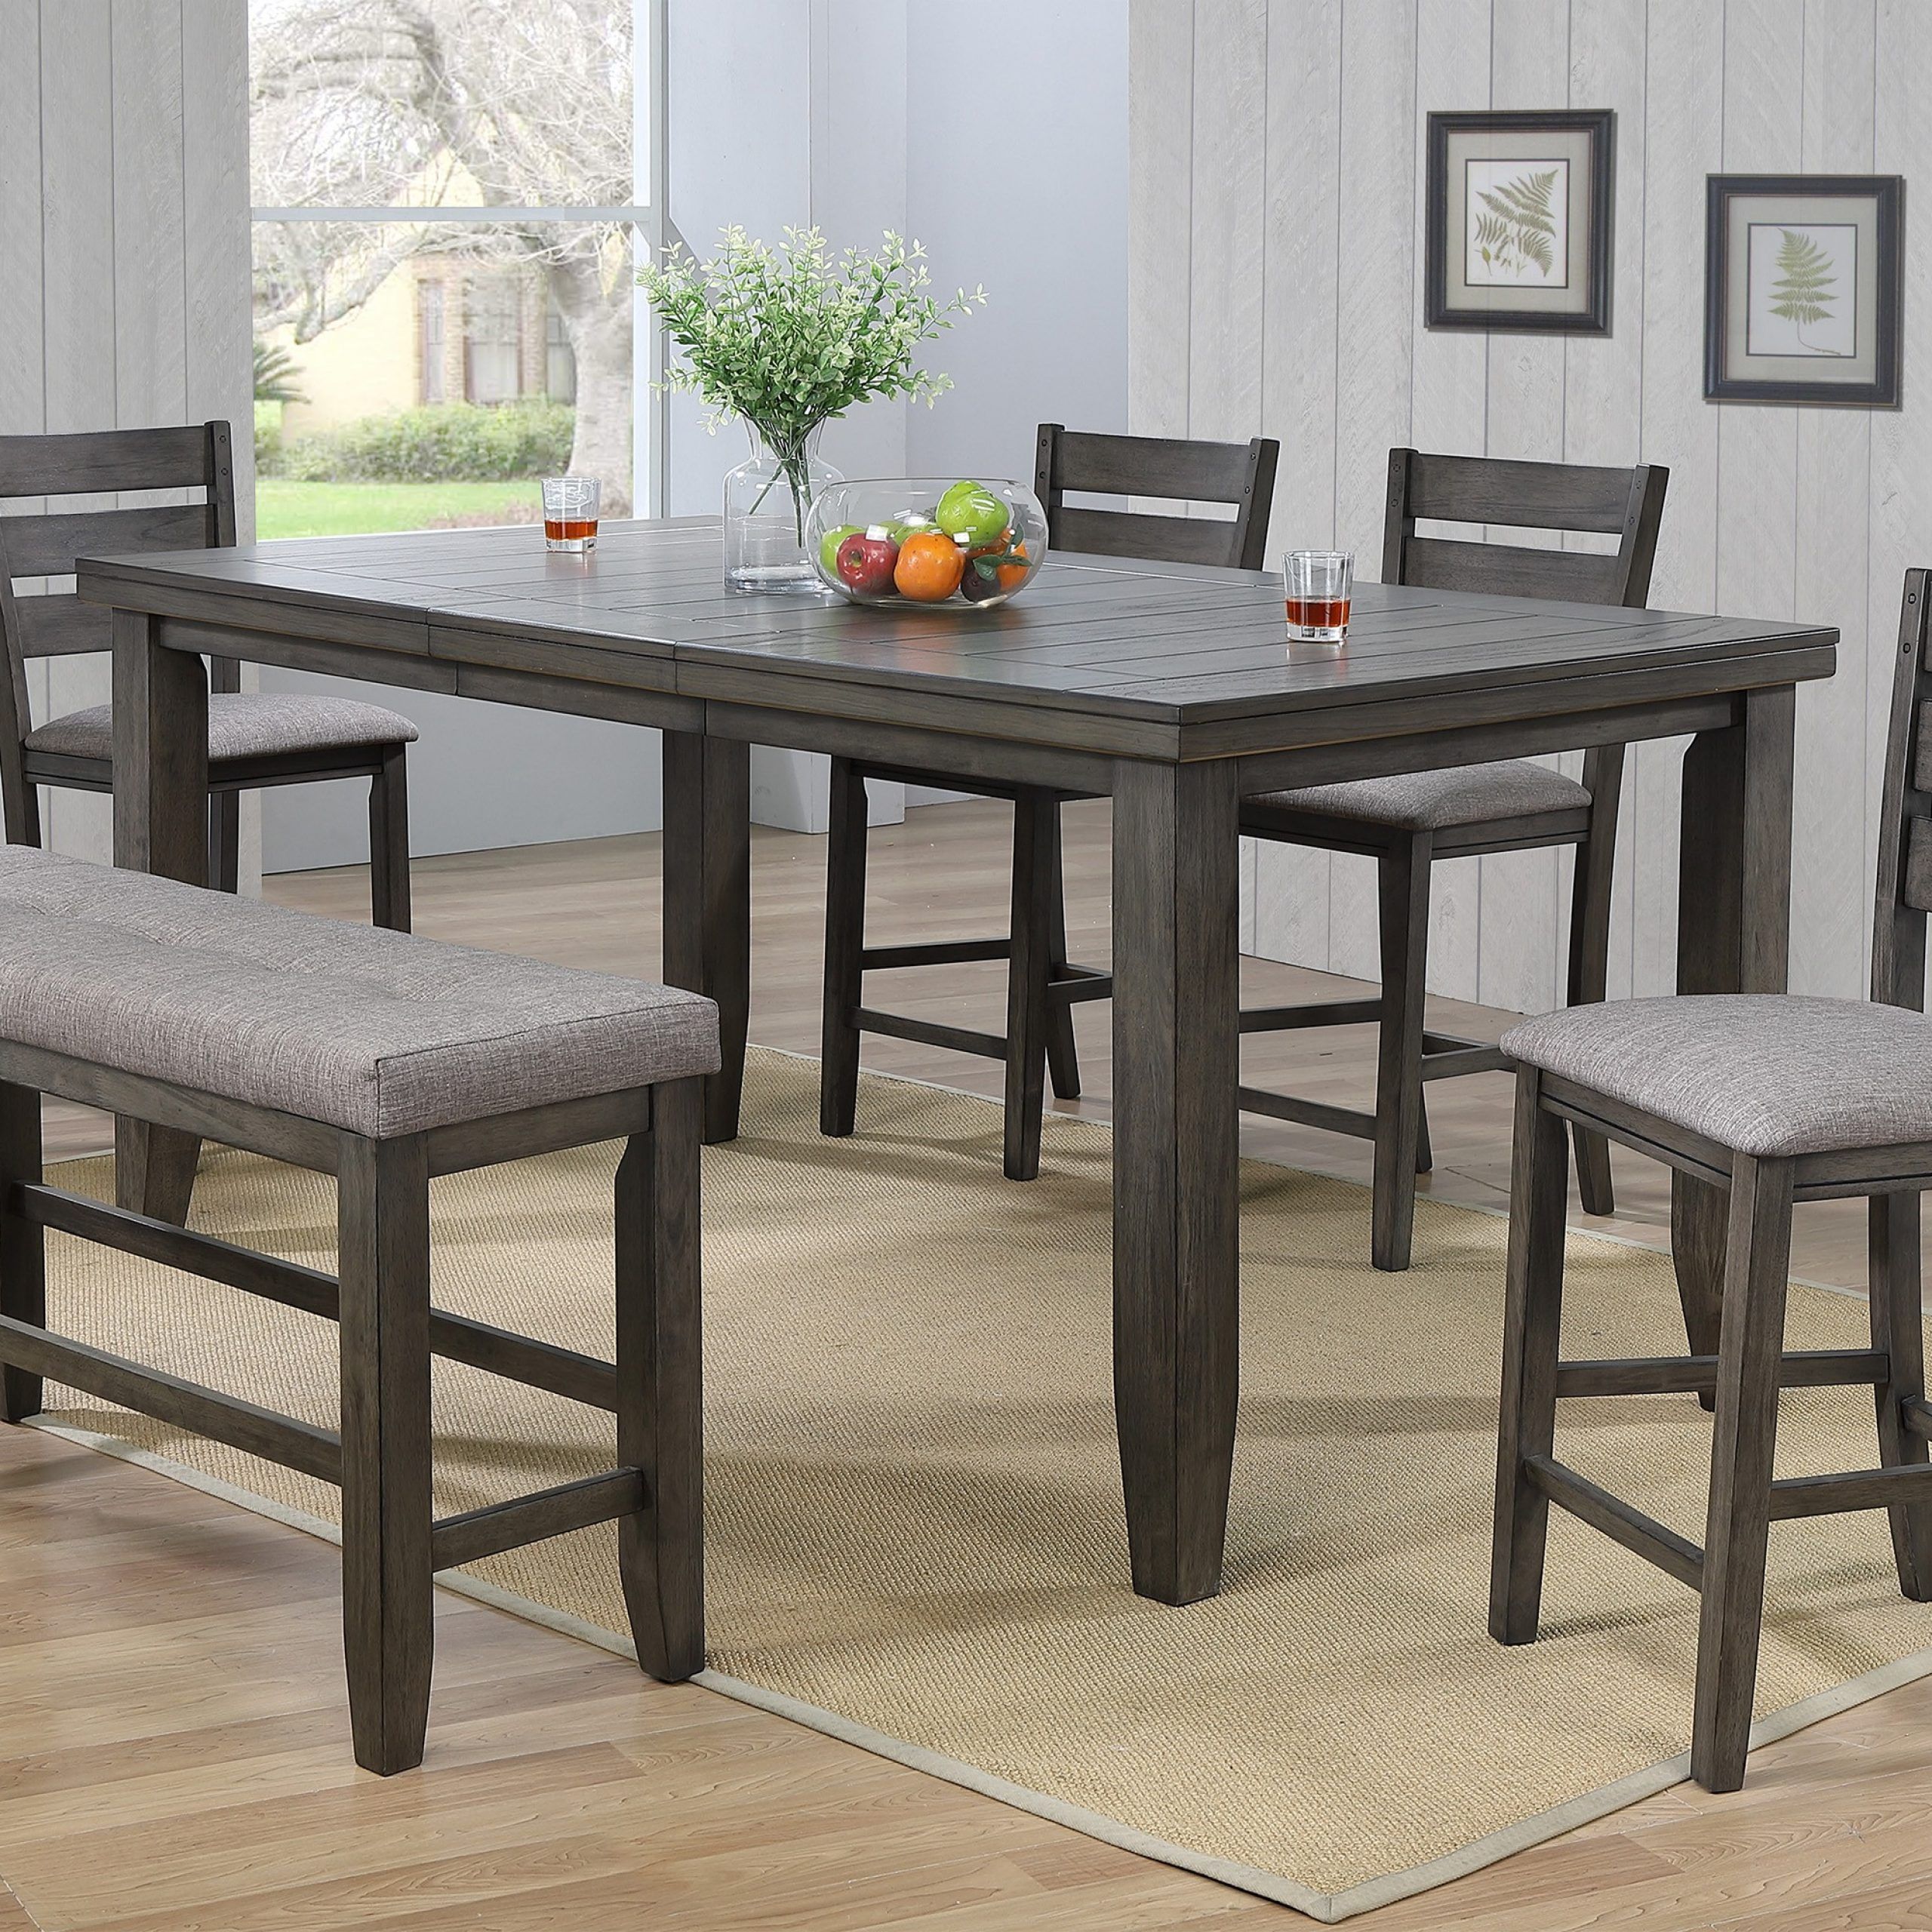 Abby Bar Height Dining Tables In 2019 Bardstown 5pc (View 2 of 20)